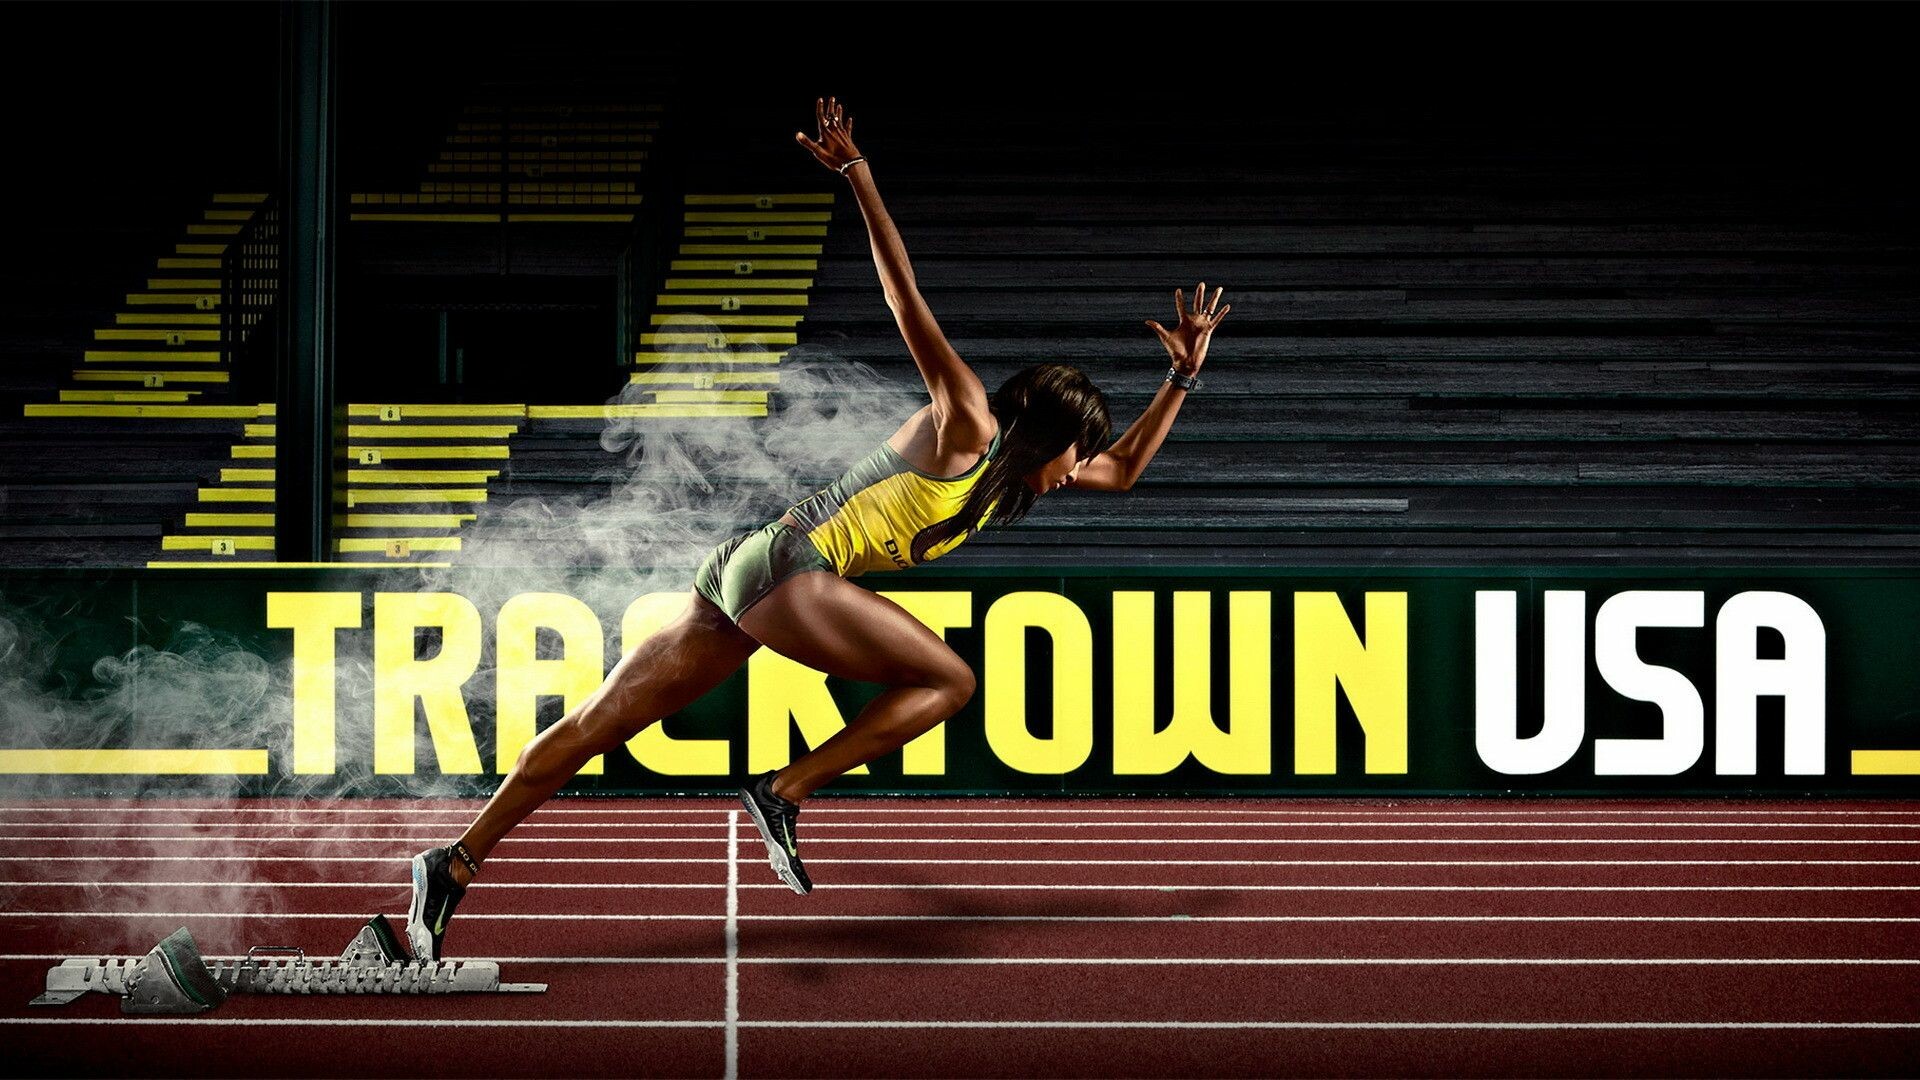 Nike track and field, Performance gear, Sporting excellence, Elite athleticism, 1920x1080 Full HD Desktop